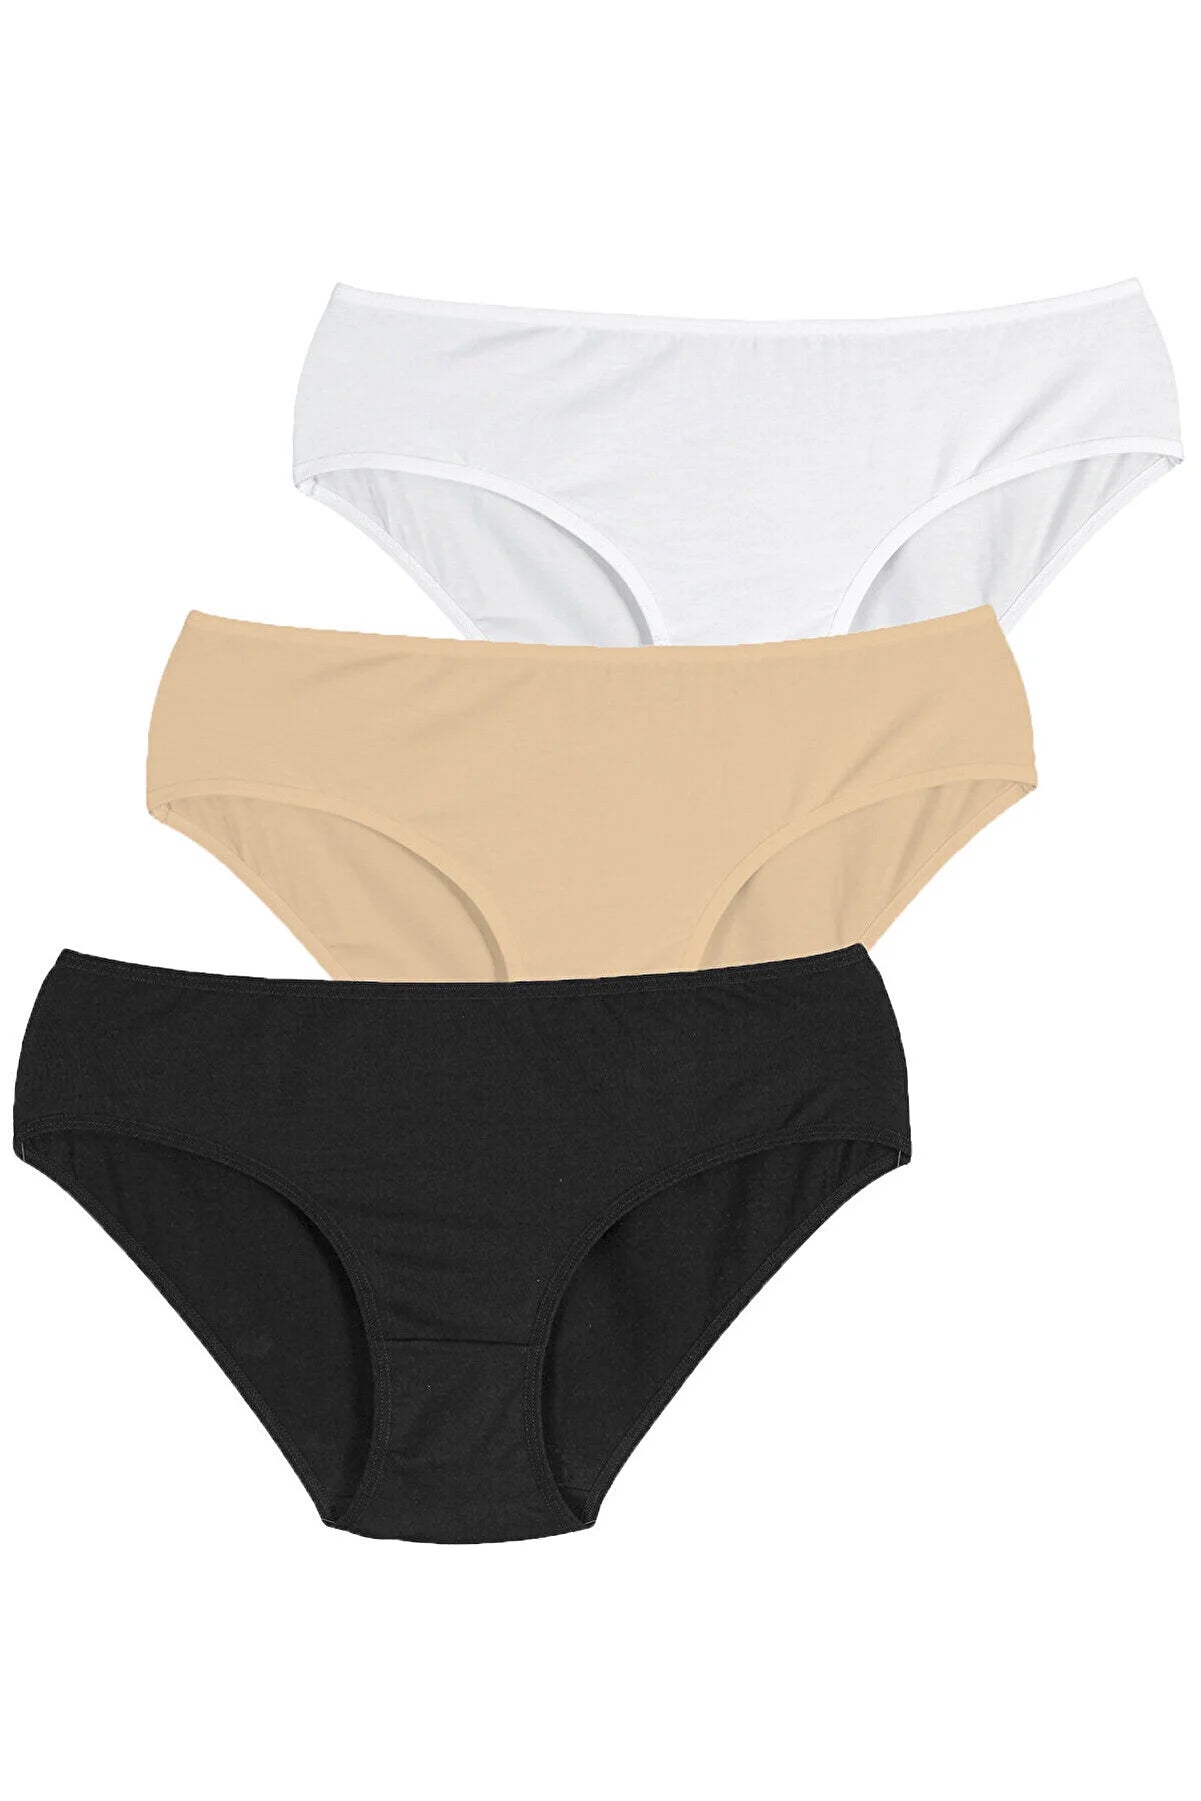 Cover 3-Piece Multi-Colored Slip Panties: Ultimate Comfort and Style for Every Woman